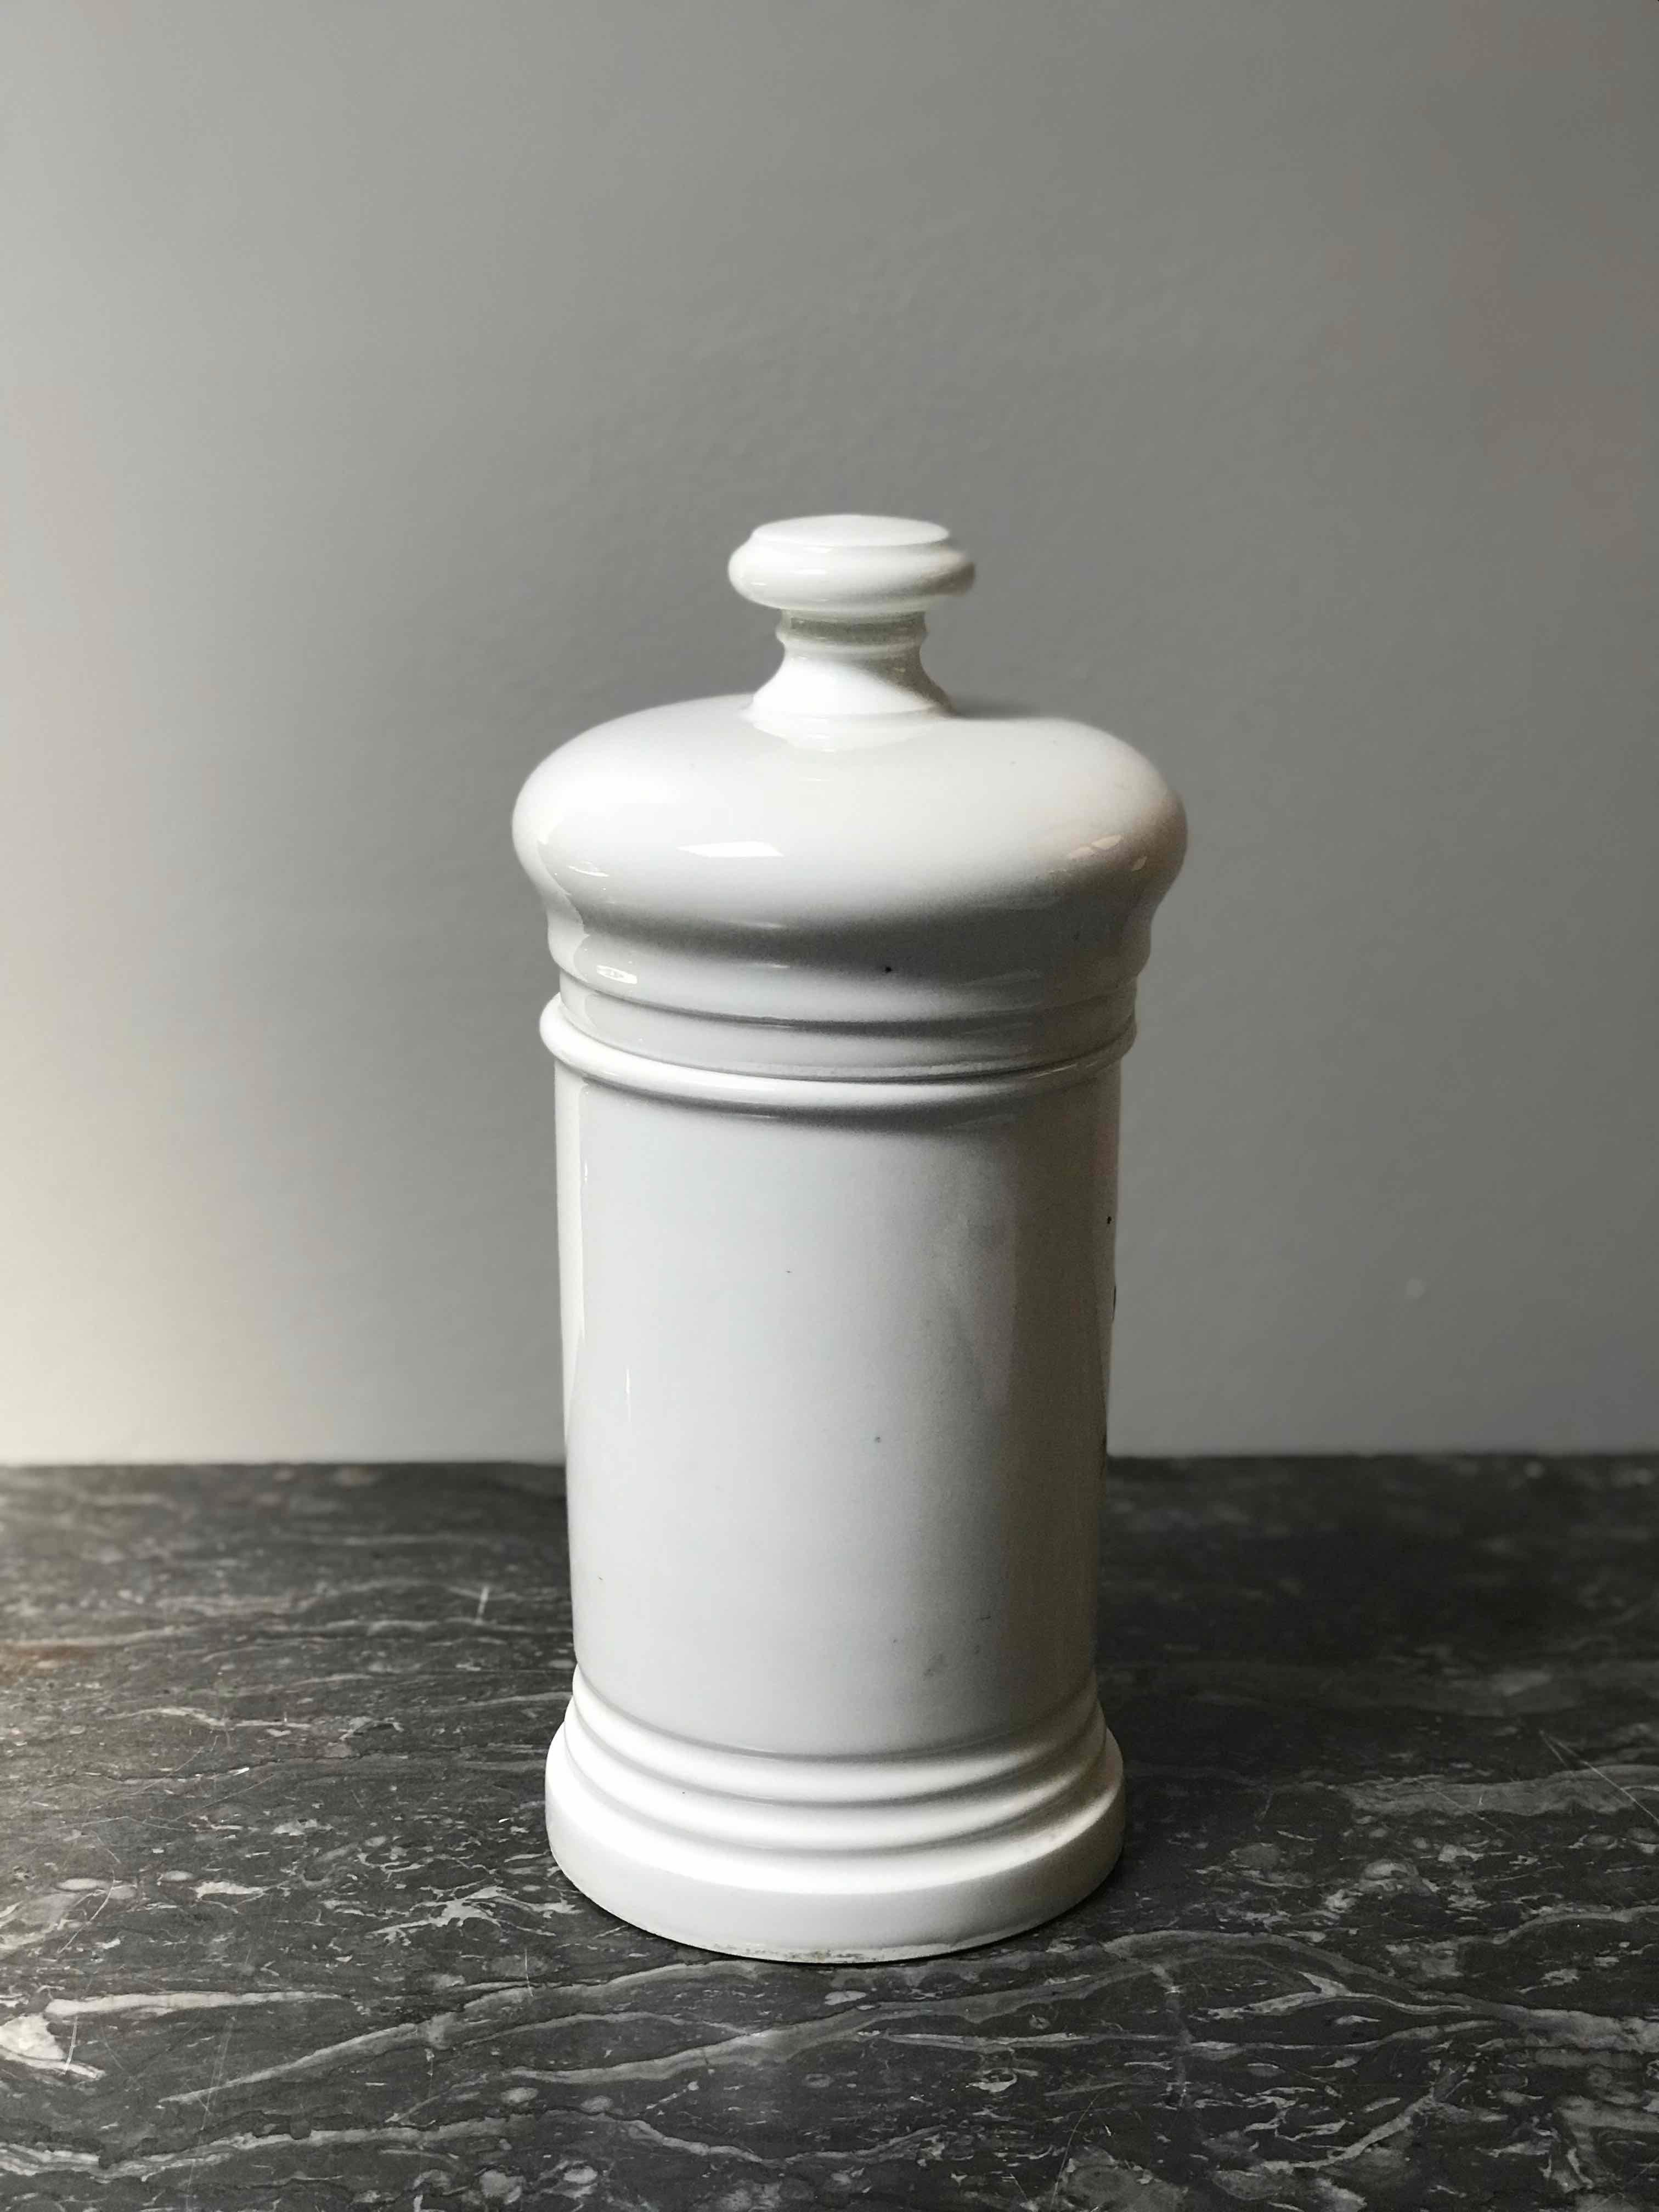 A white porcelain canister from an herb dispensary.